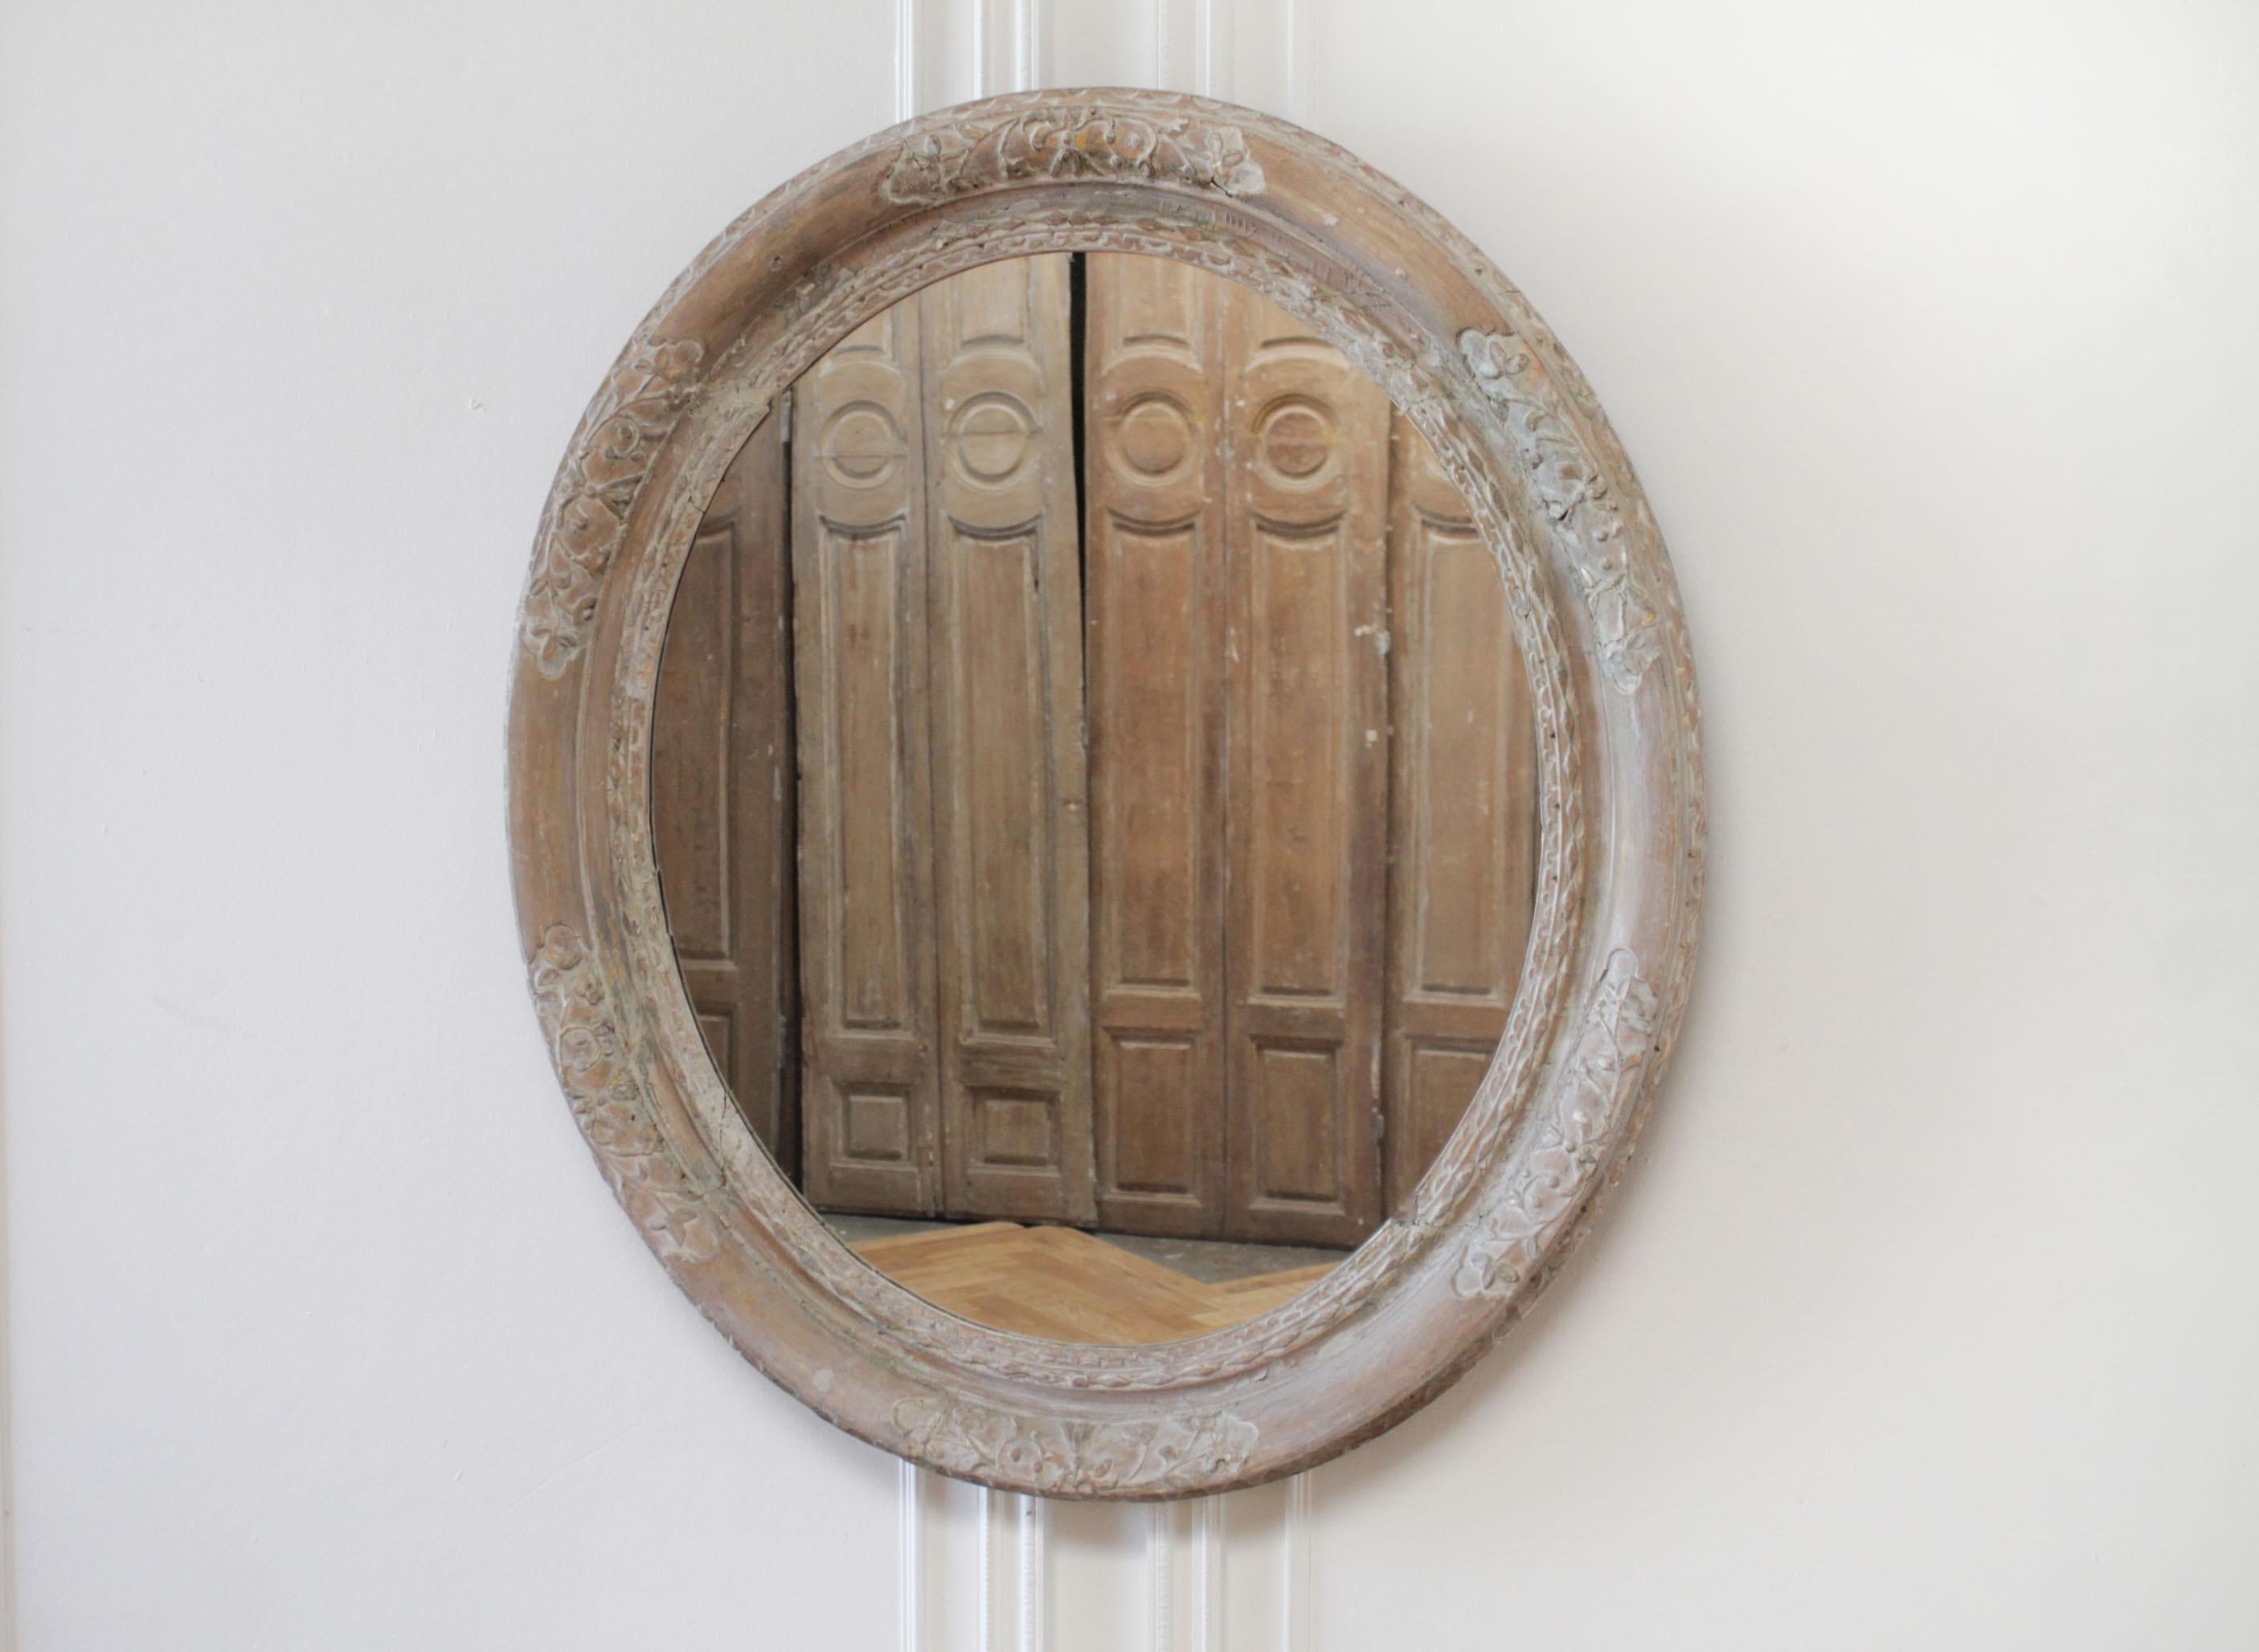 Light wood carved oval mirror with a gray washed look.
Mirror frame is solid and not loose, there are a few areas of minor missing carvings.
Size: 32.5